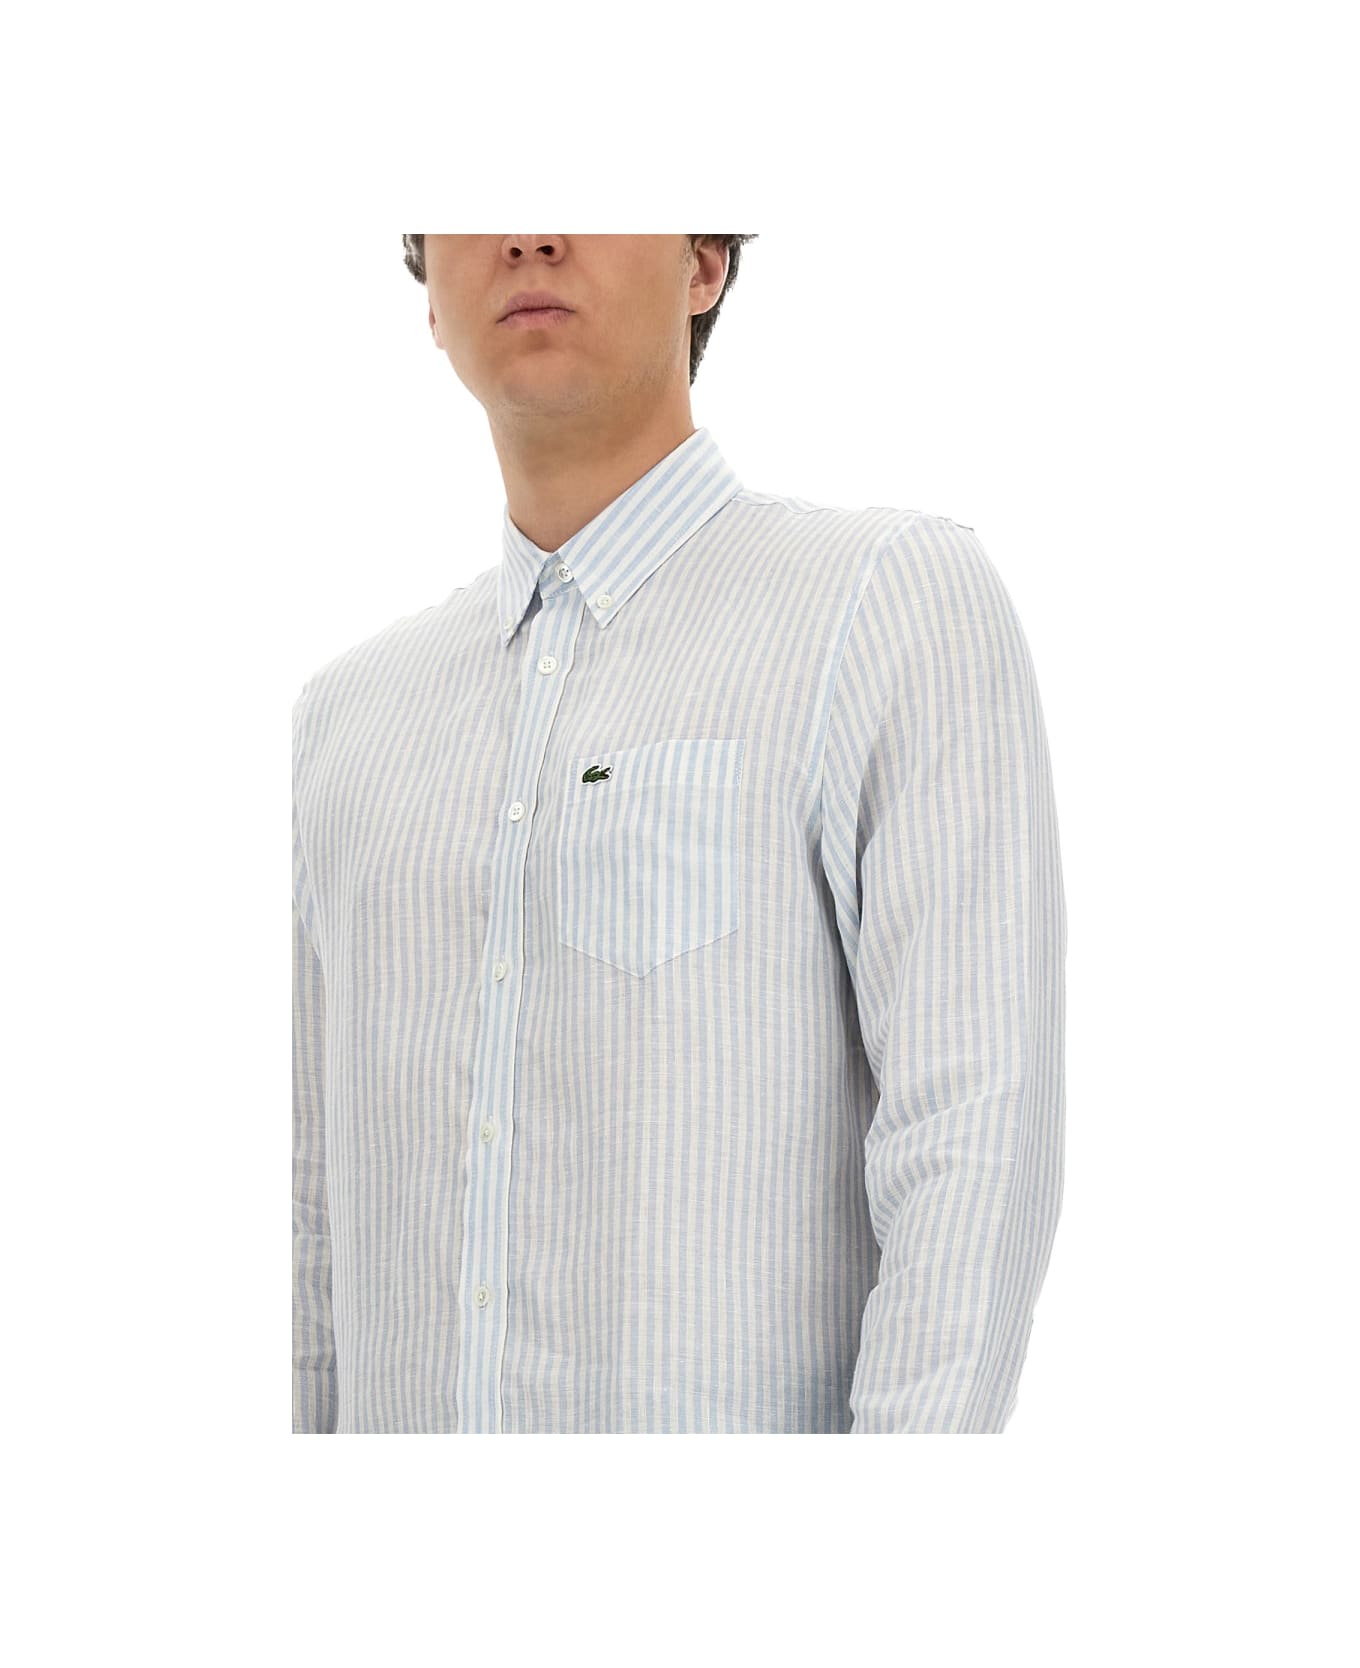 Lacoste Shirt With Logo - MULTICOLOUR シャツ